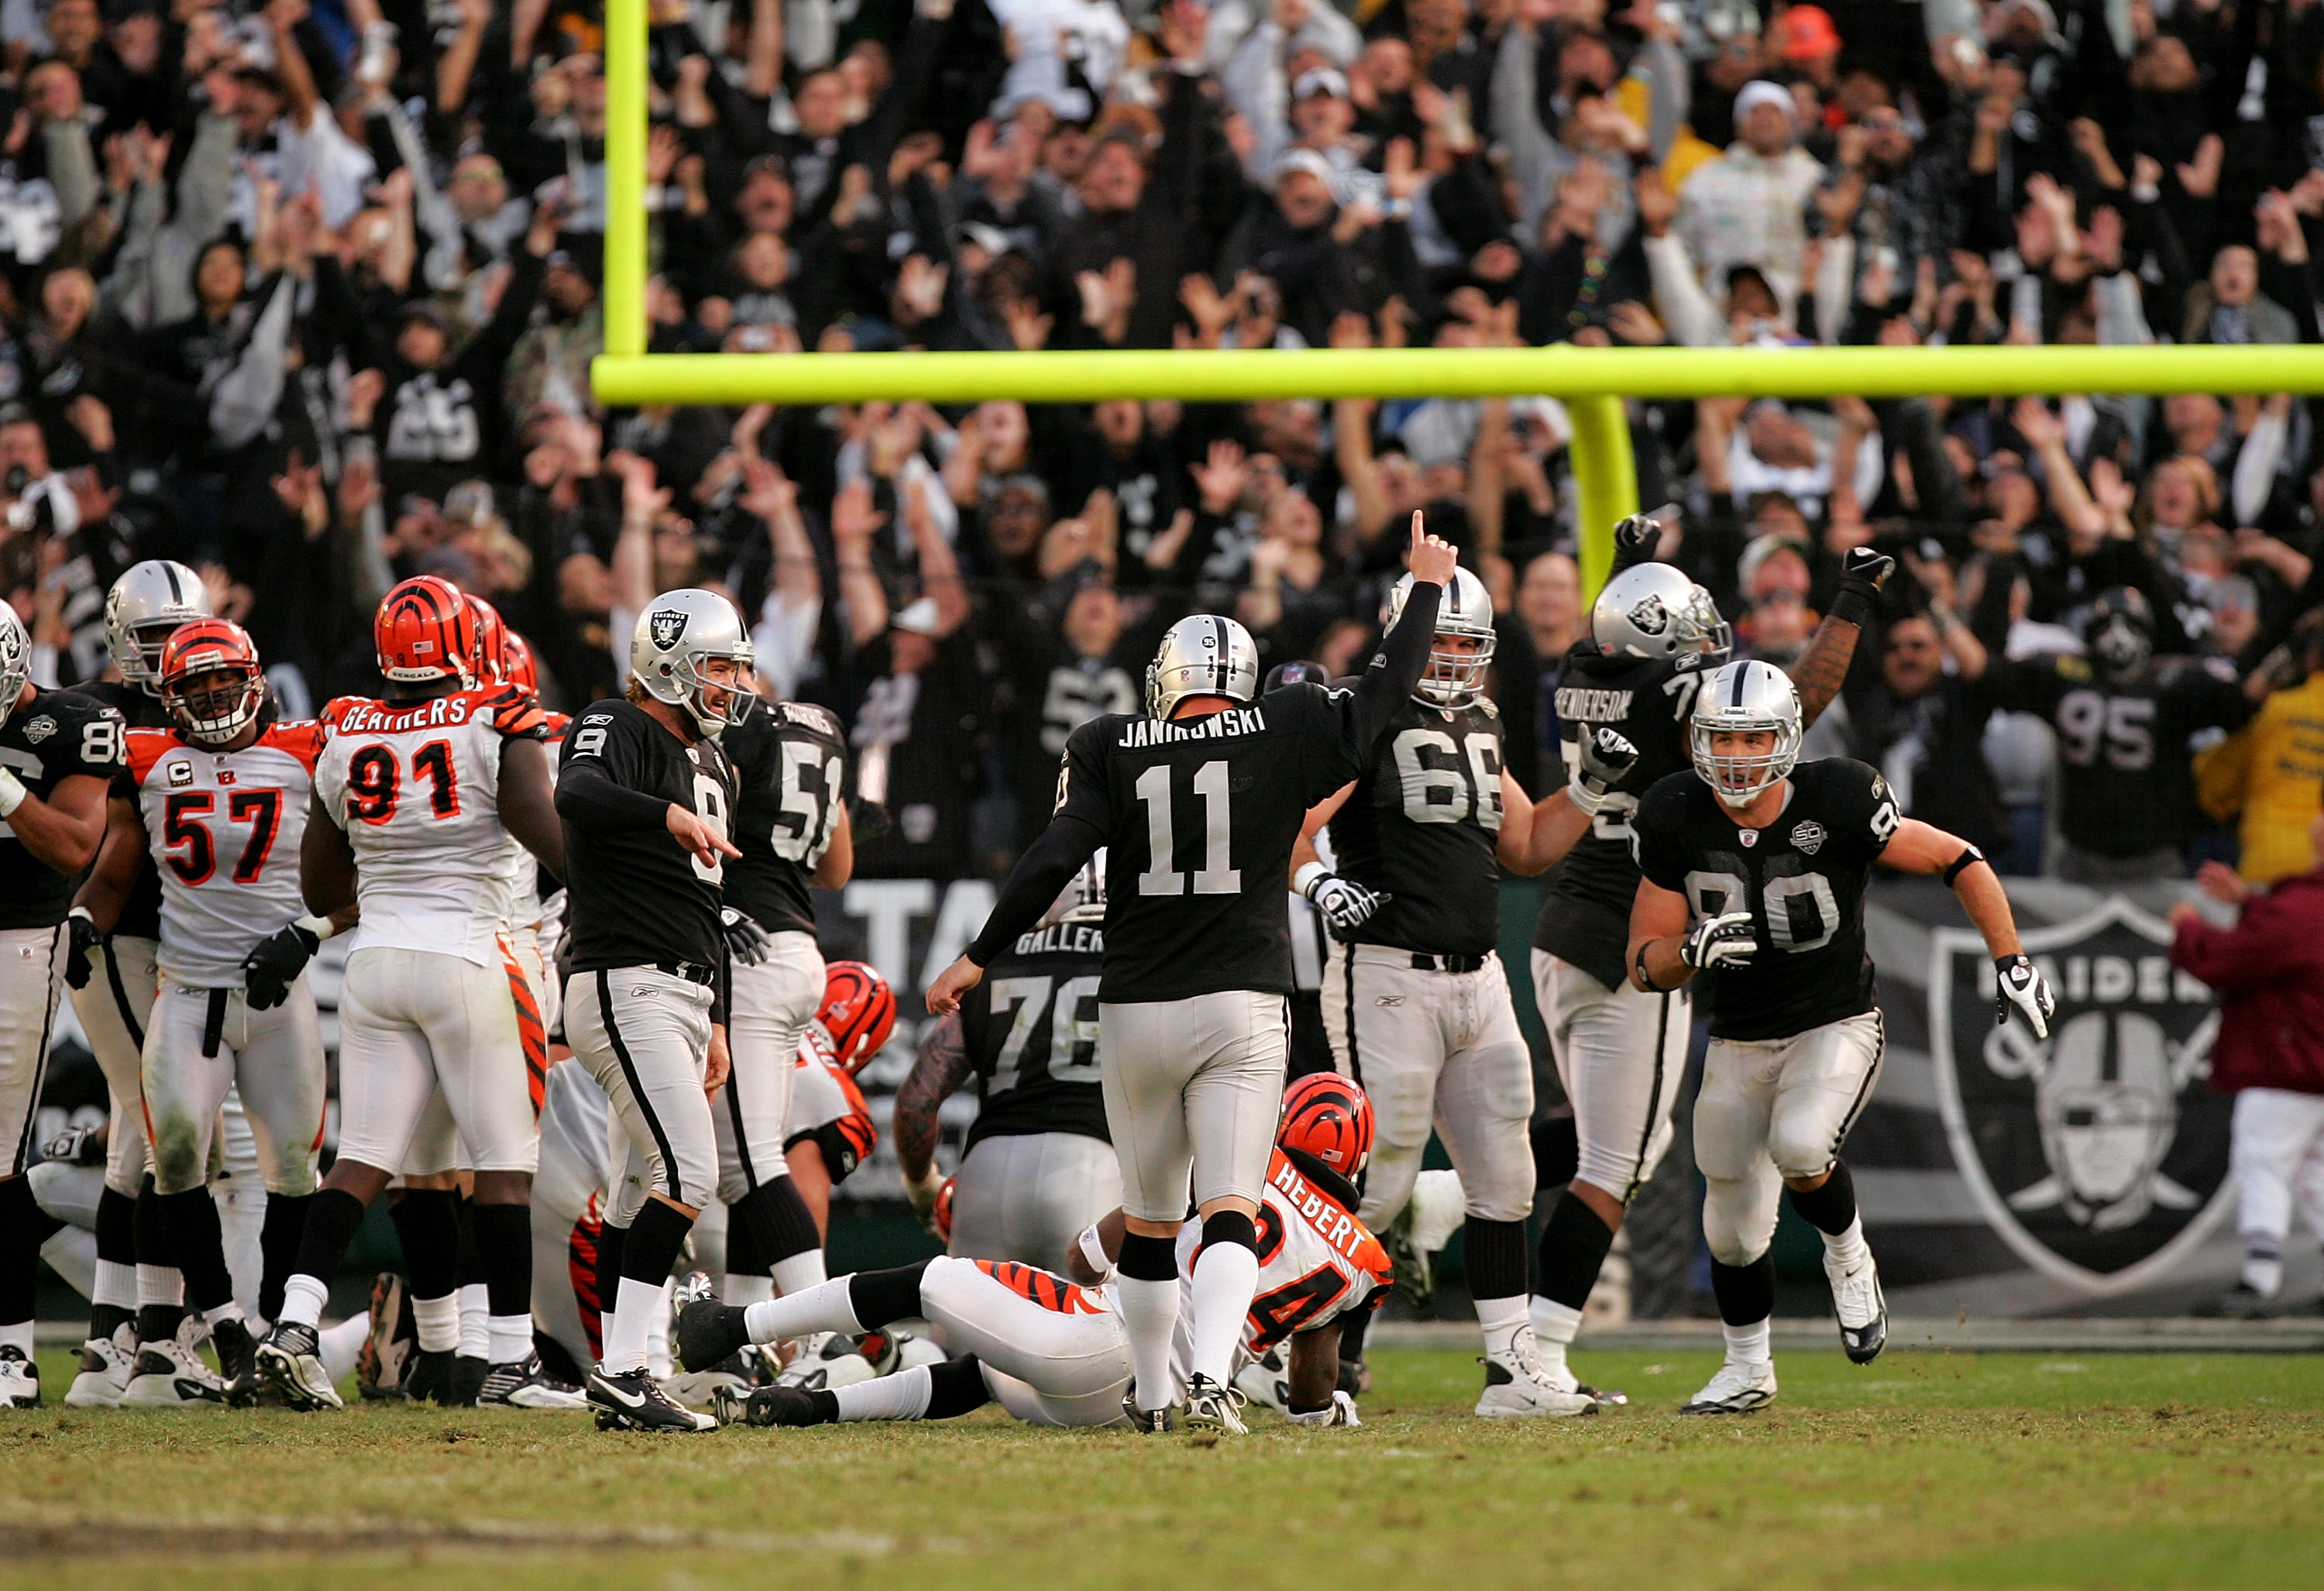 This game could be won or lost on the leg of Sebastian Janikowski.